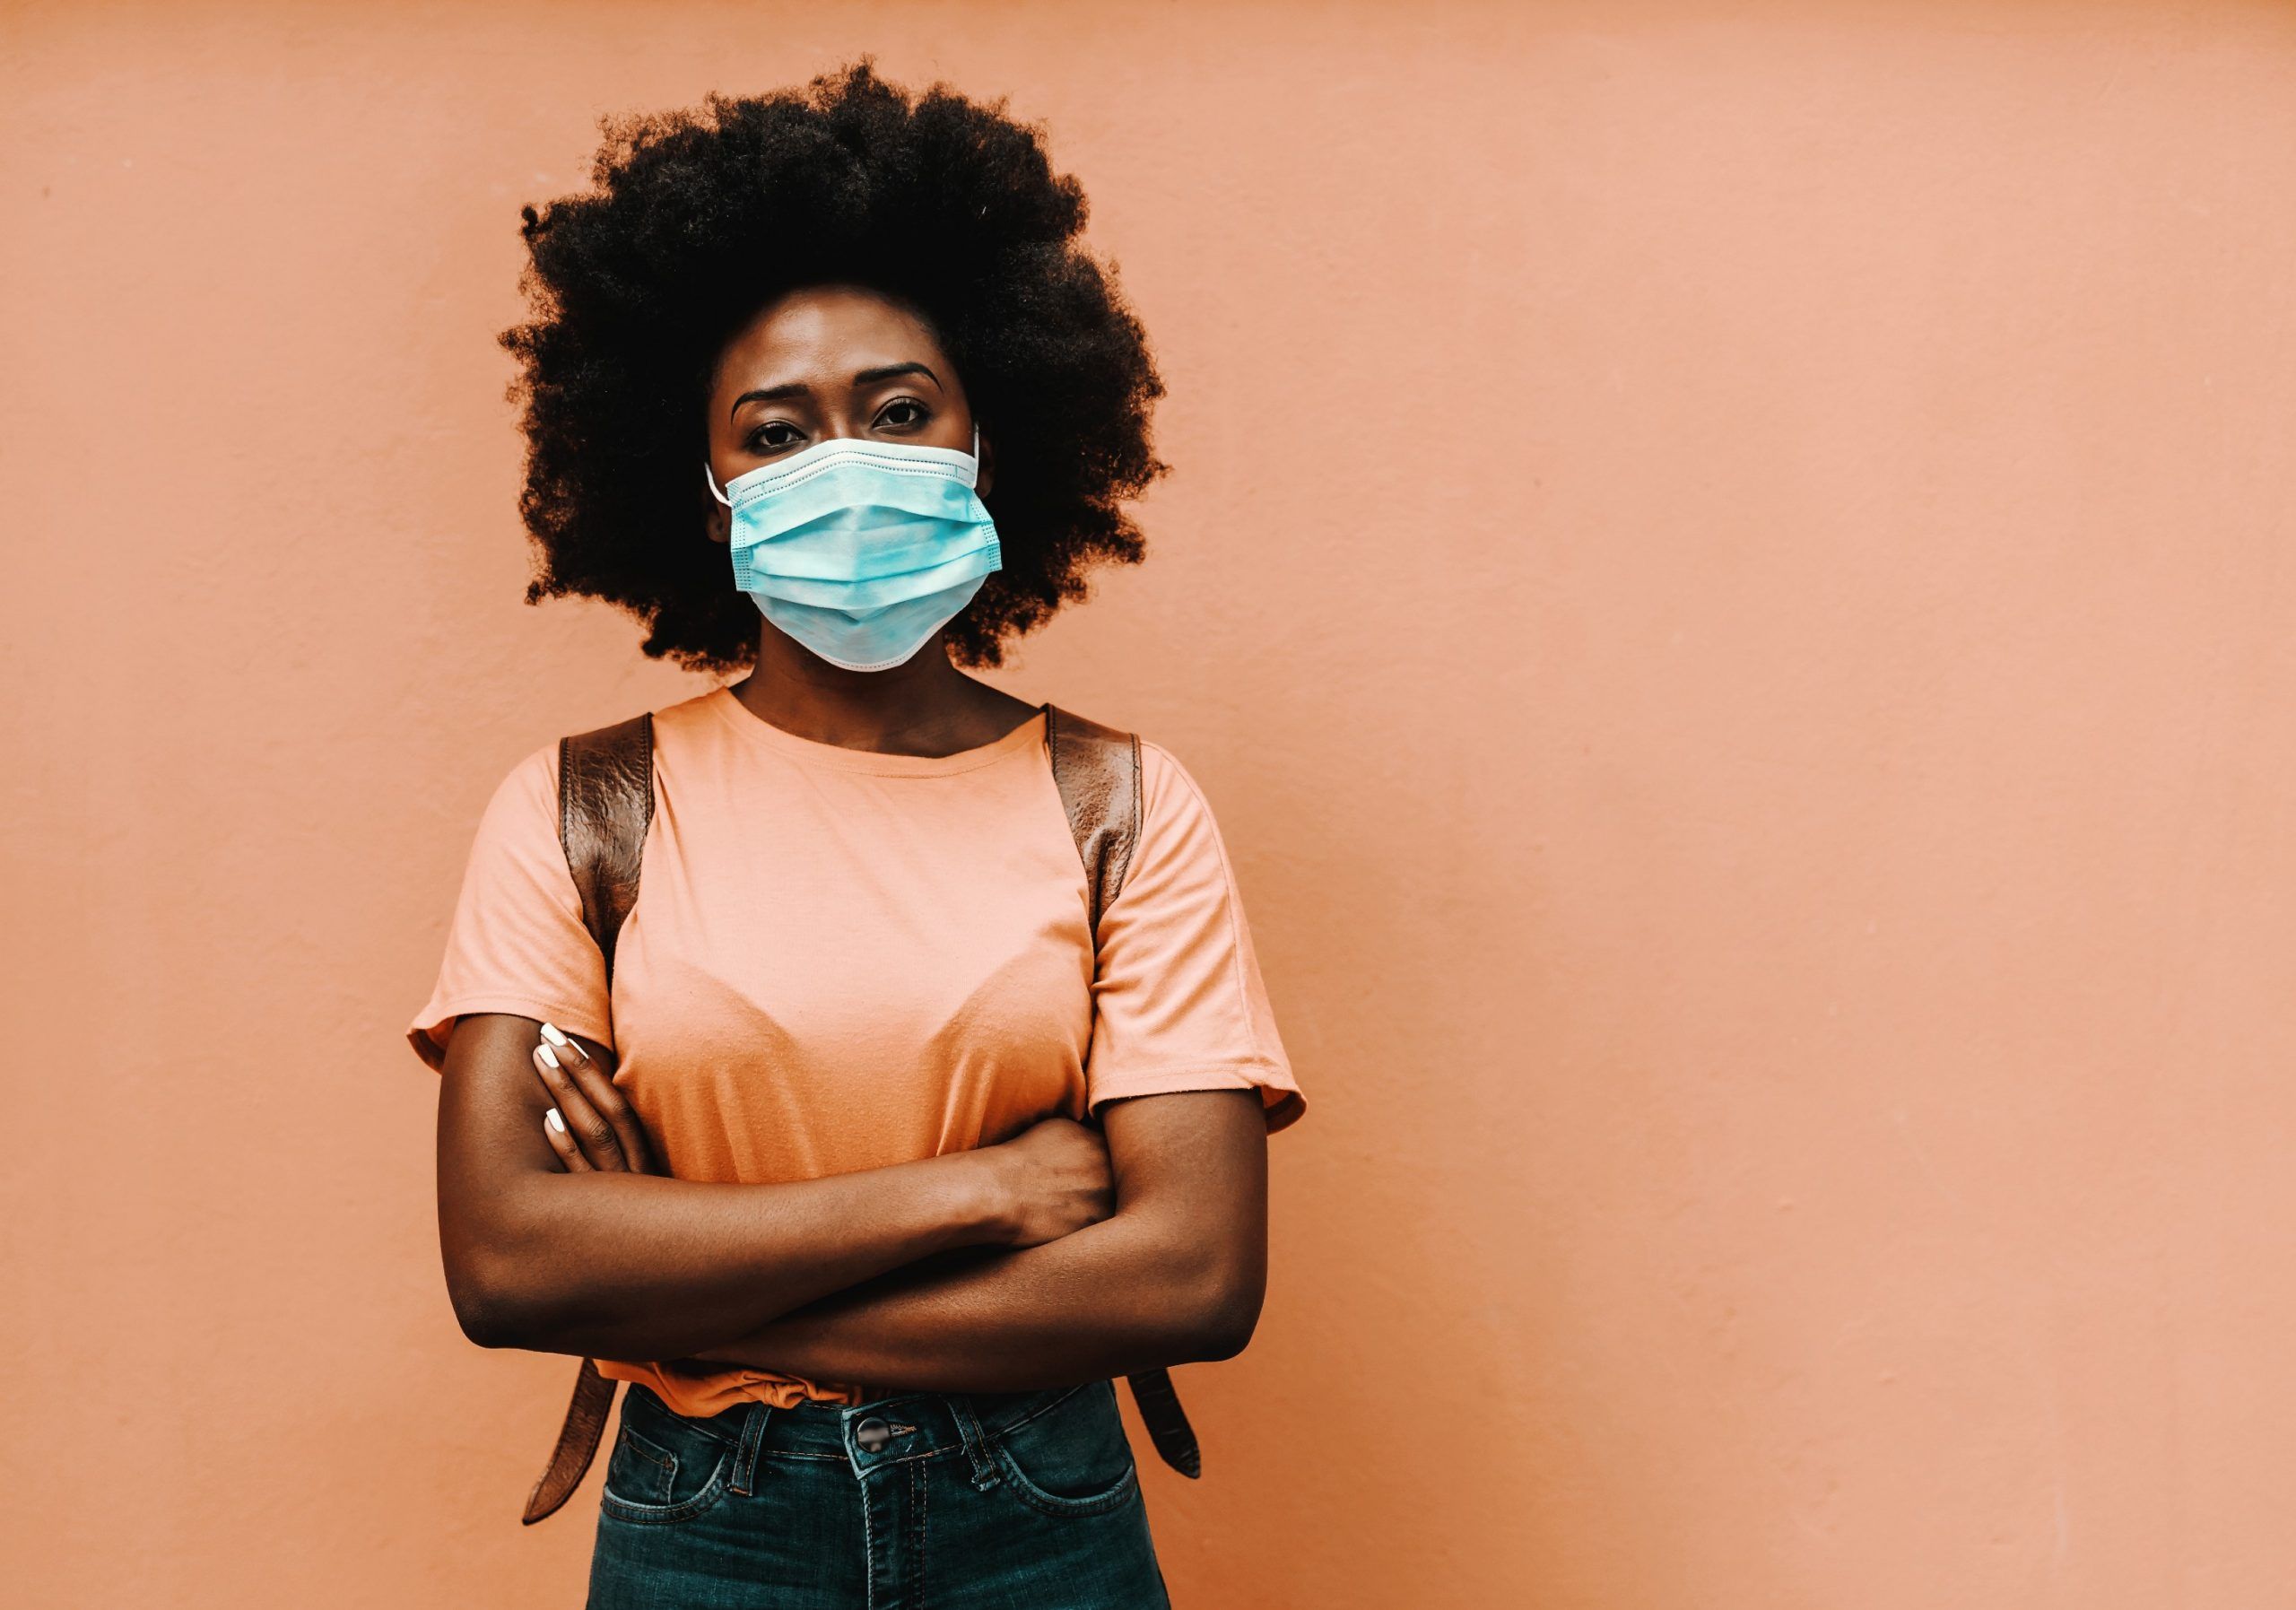 COVID-19 has lifted the veil off long-ignored historical inequities and amplified gendered race-based differences in how we experience health crises.